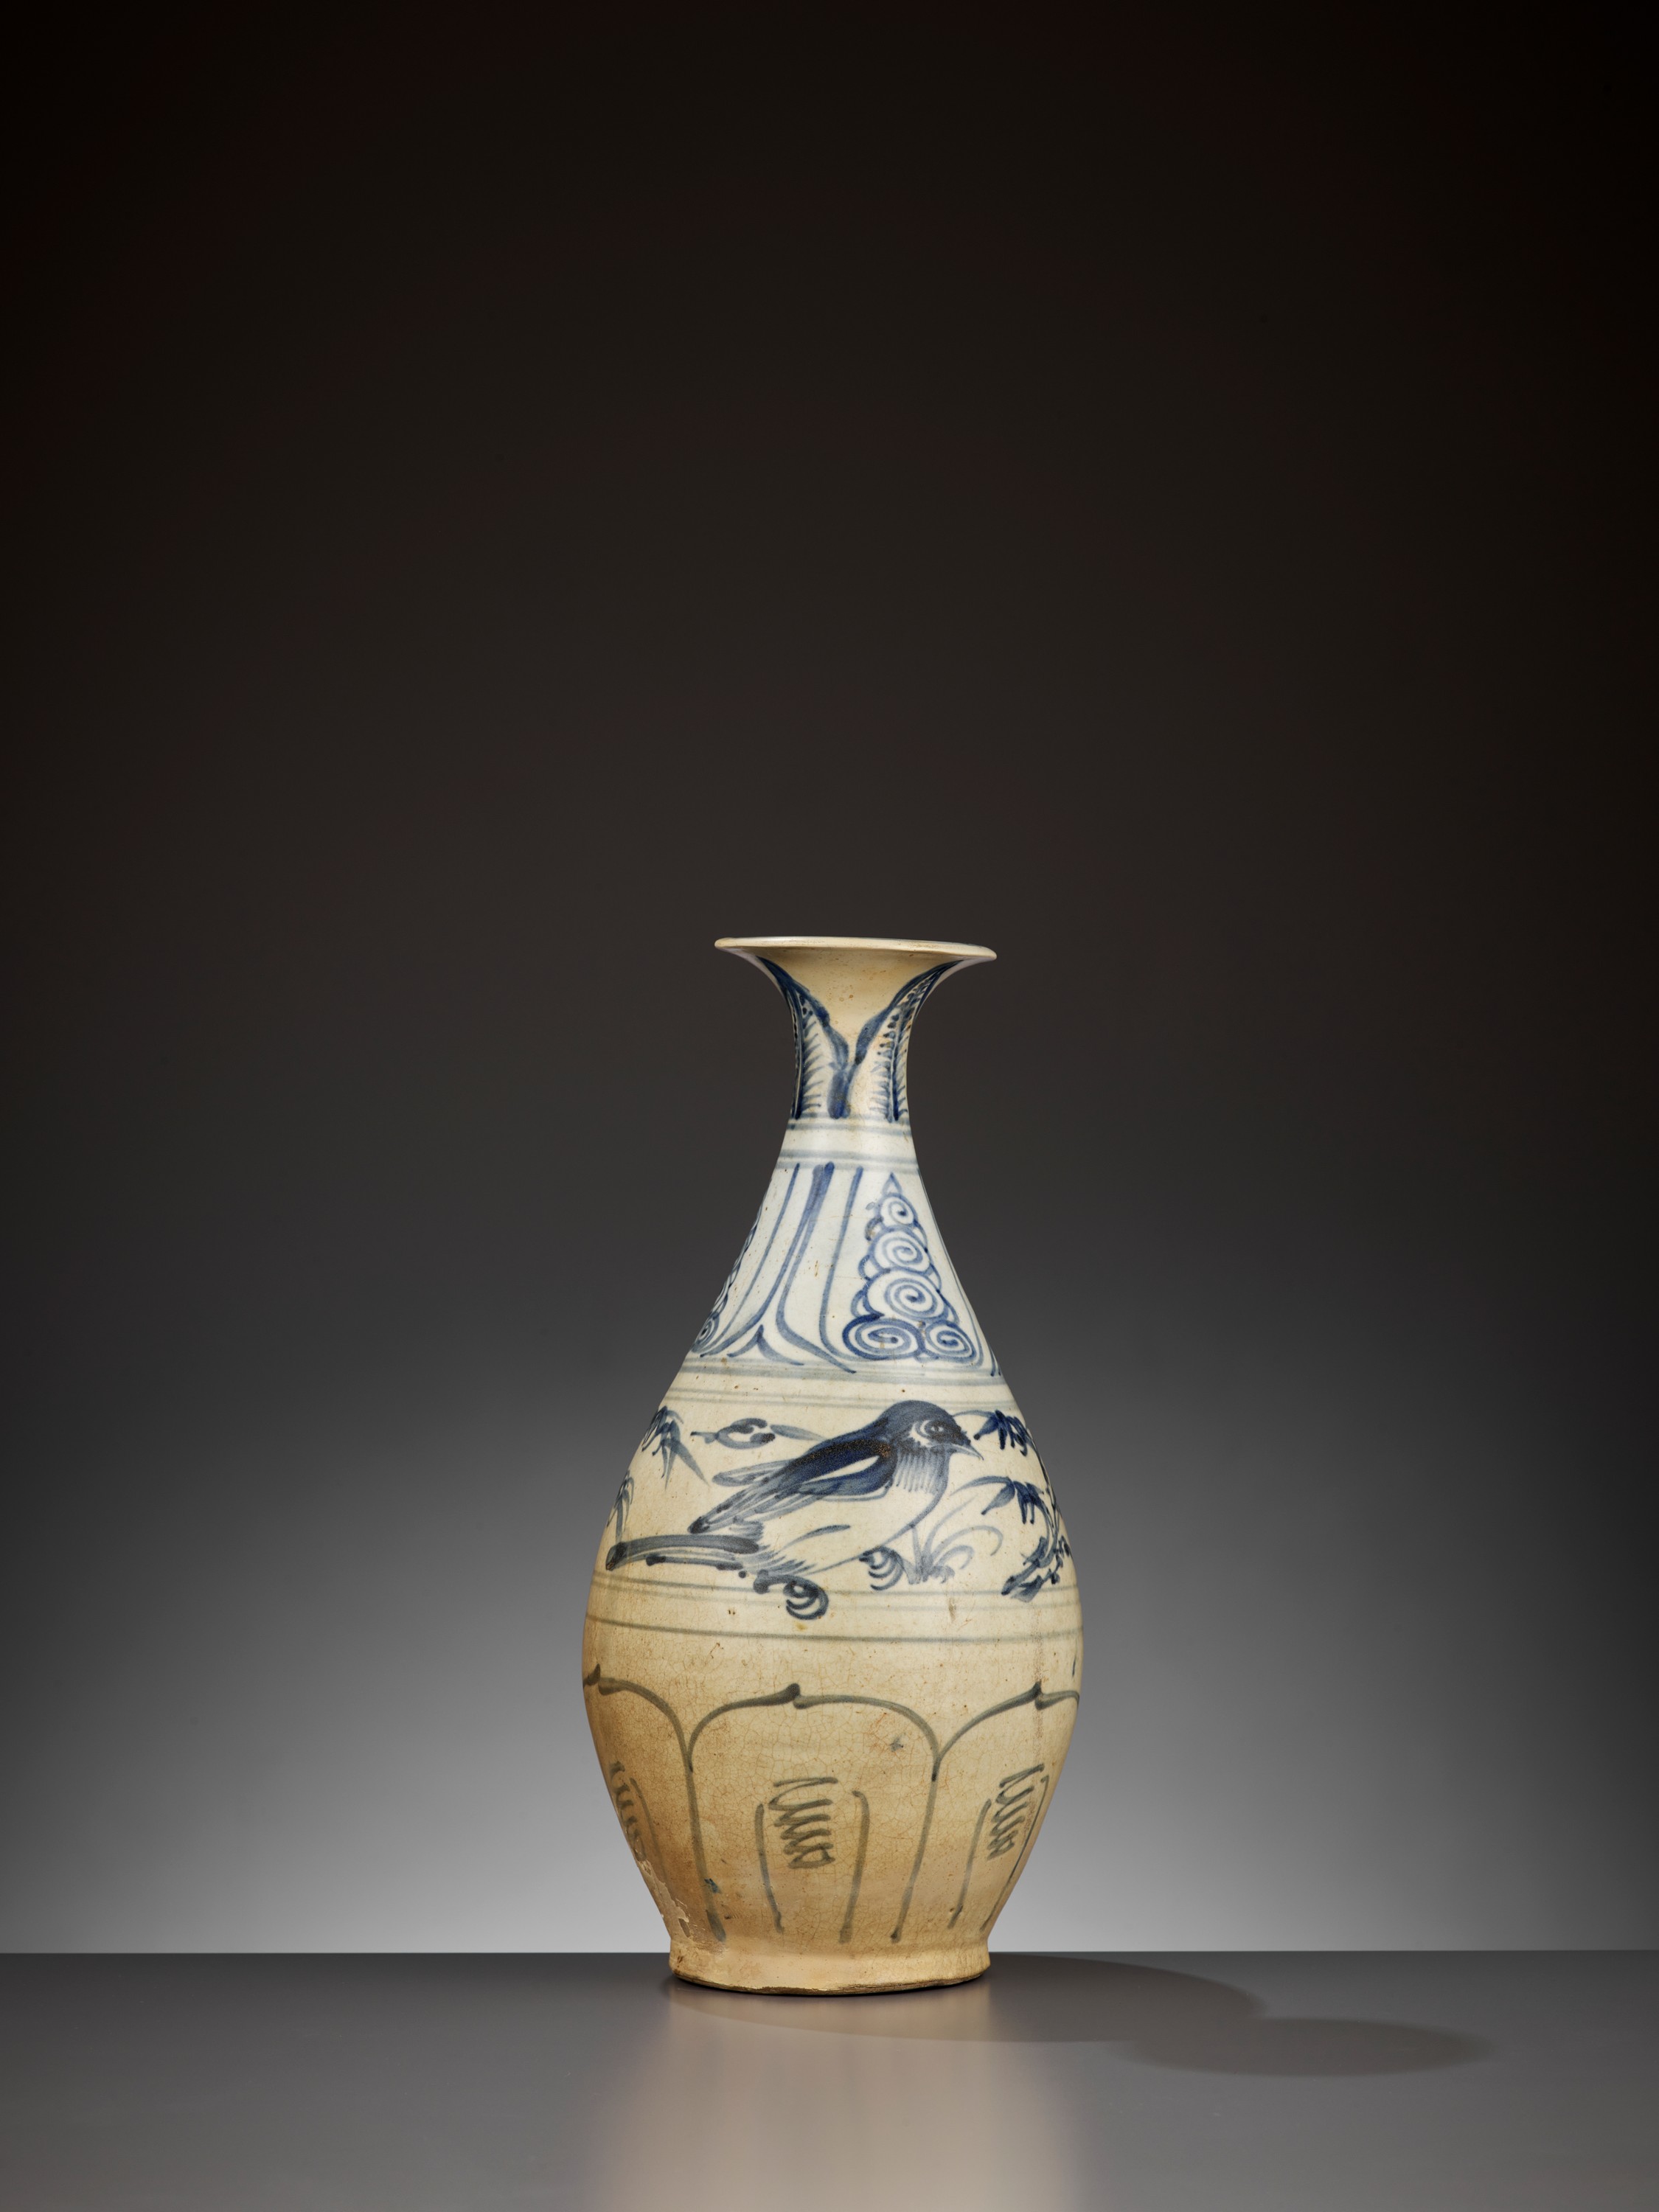 A BLUE AND WHITE BOTTLE, BINH TY BA, LE DYNASTY